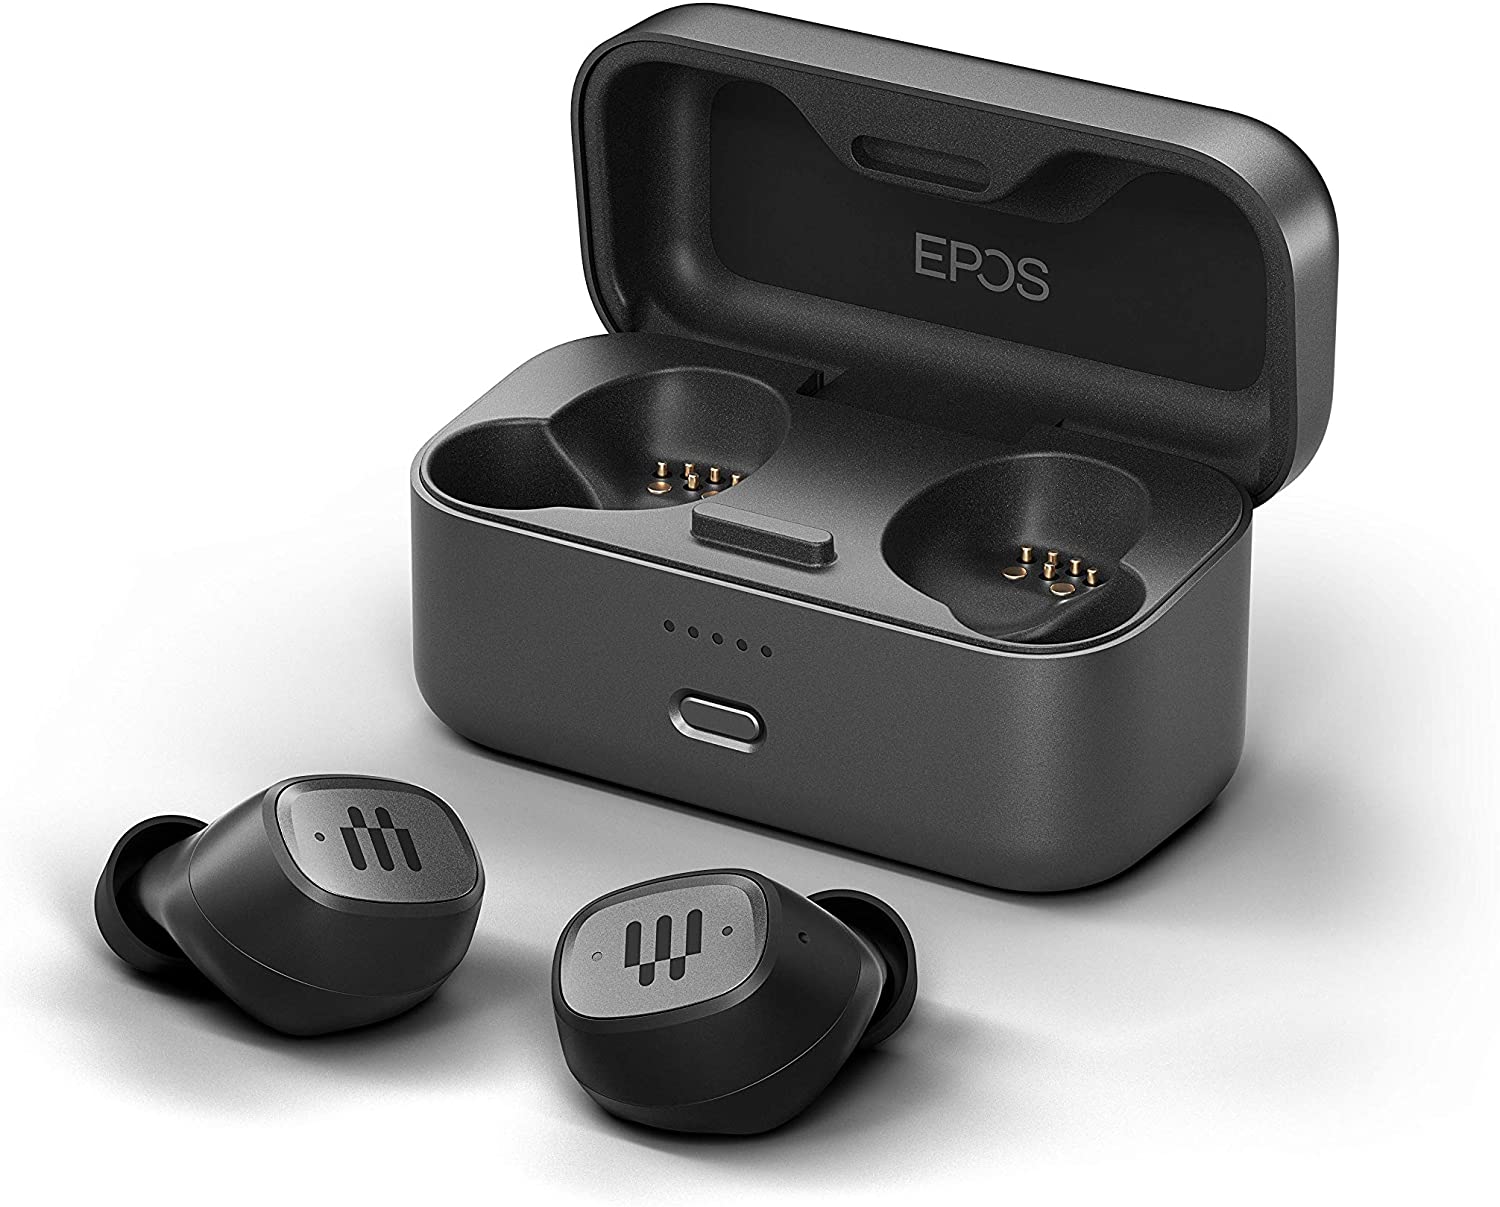 The GTW 270 Hybrid gaming earbuds are a well-designed, well-built product that delivers great gaming audio and refreshing connection options. gtw 270 hybrid e6fb140a gtw 270 hybrids image 2